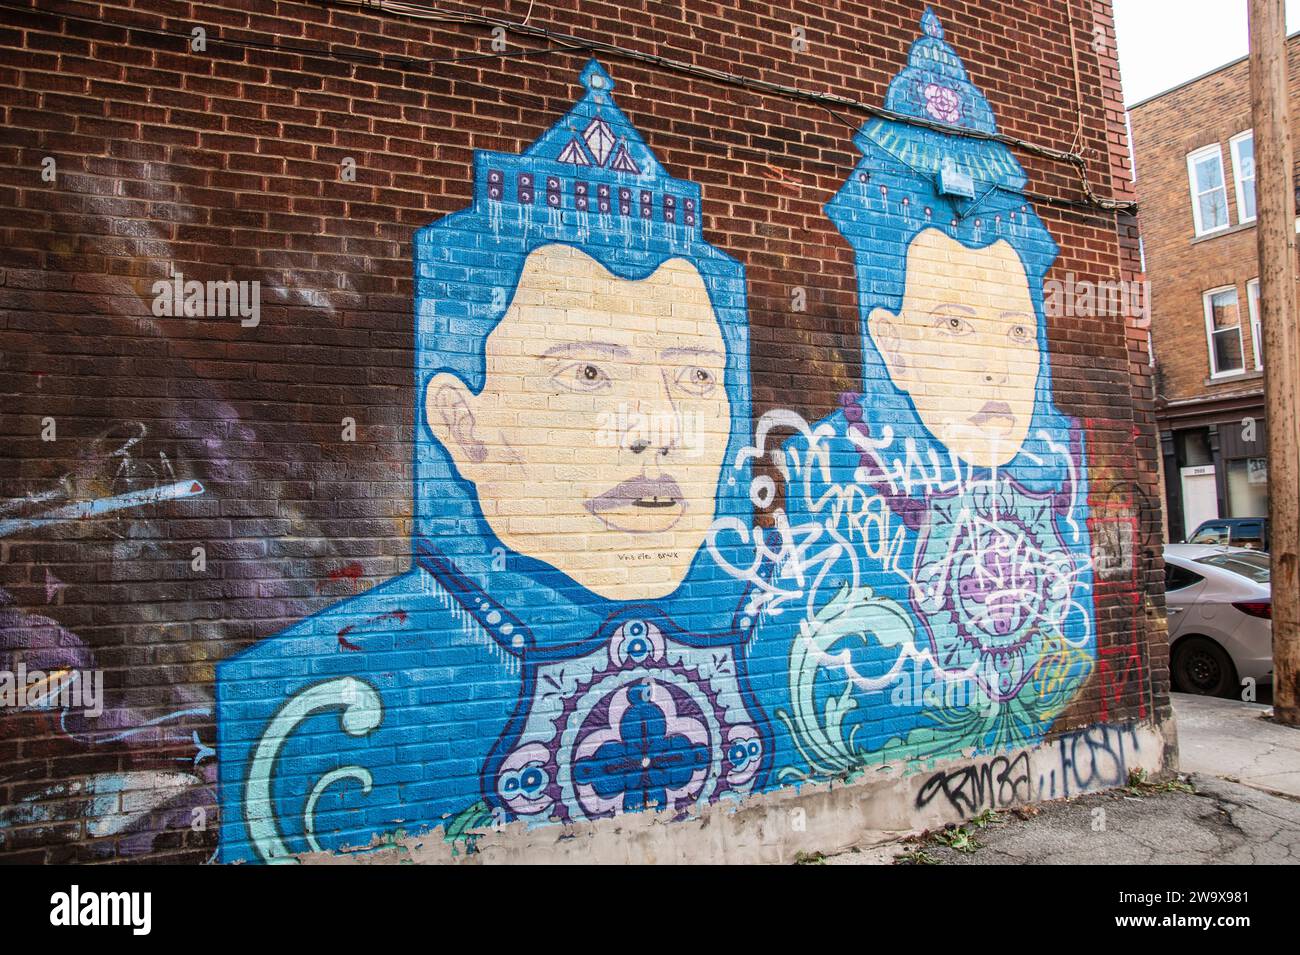 Central Asian prince and princess mural in Hochelaga neighborhood in Montreal, Quebec, Canada Stock Photo